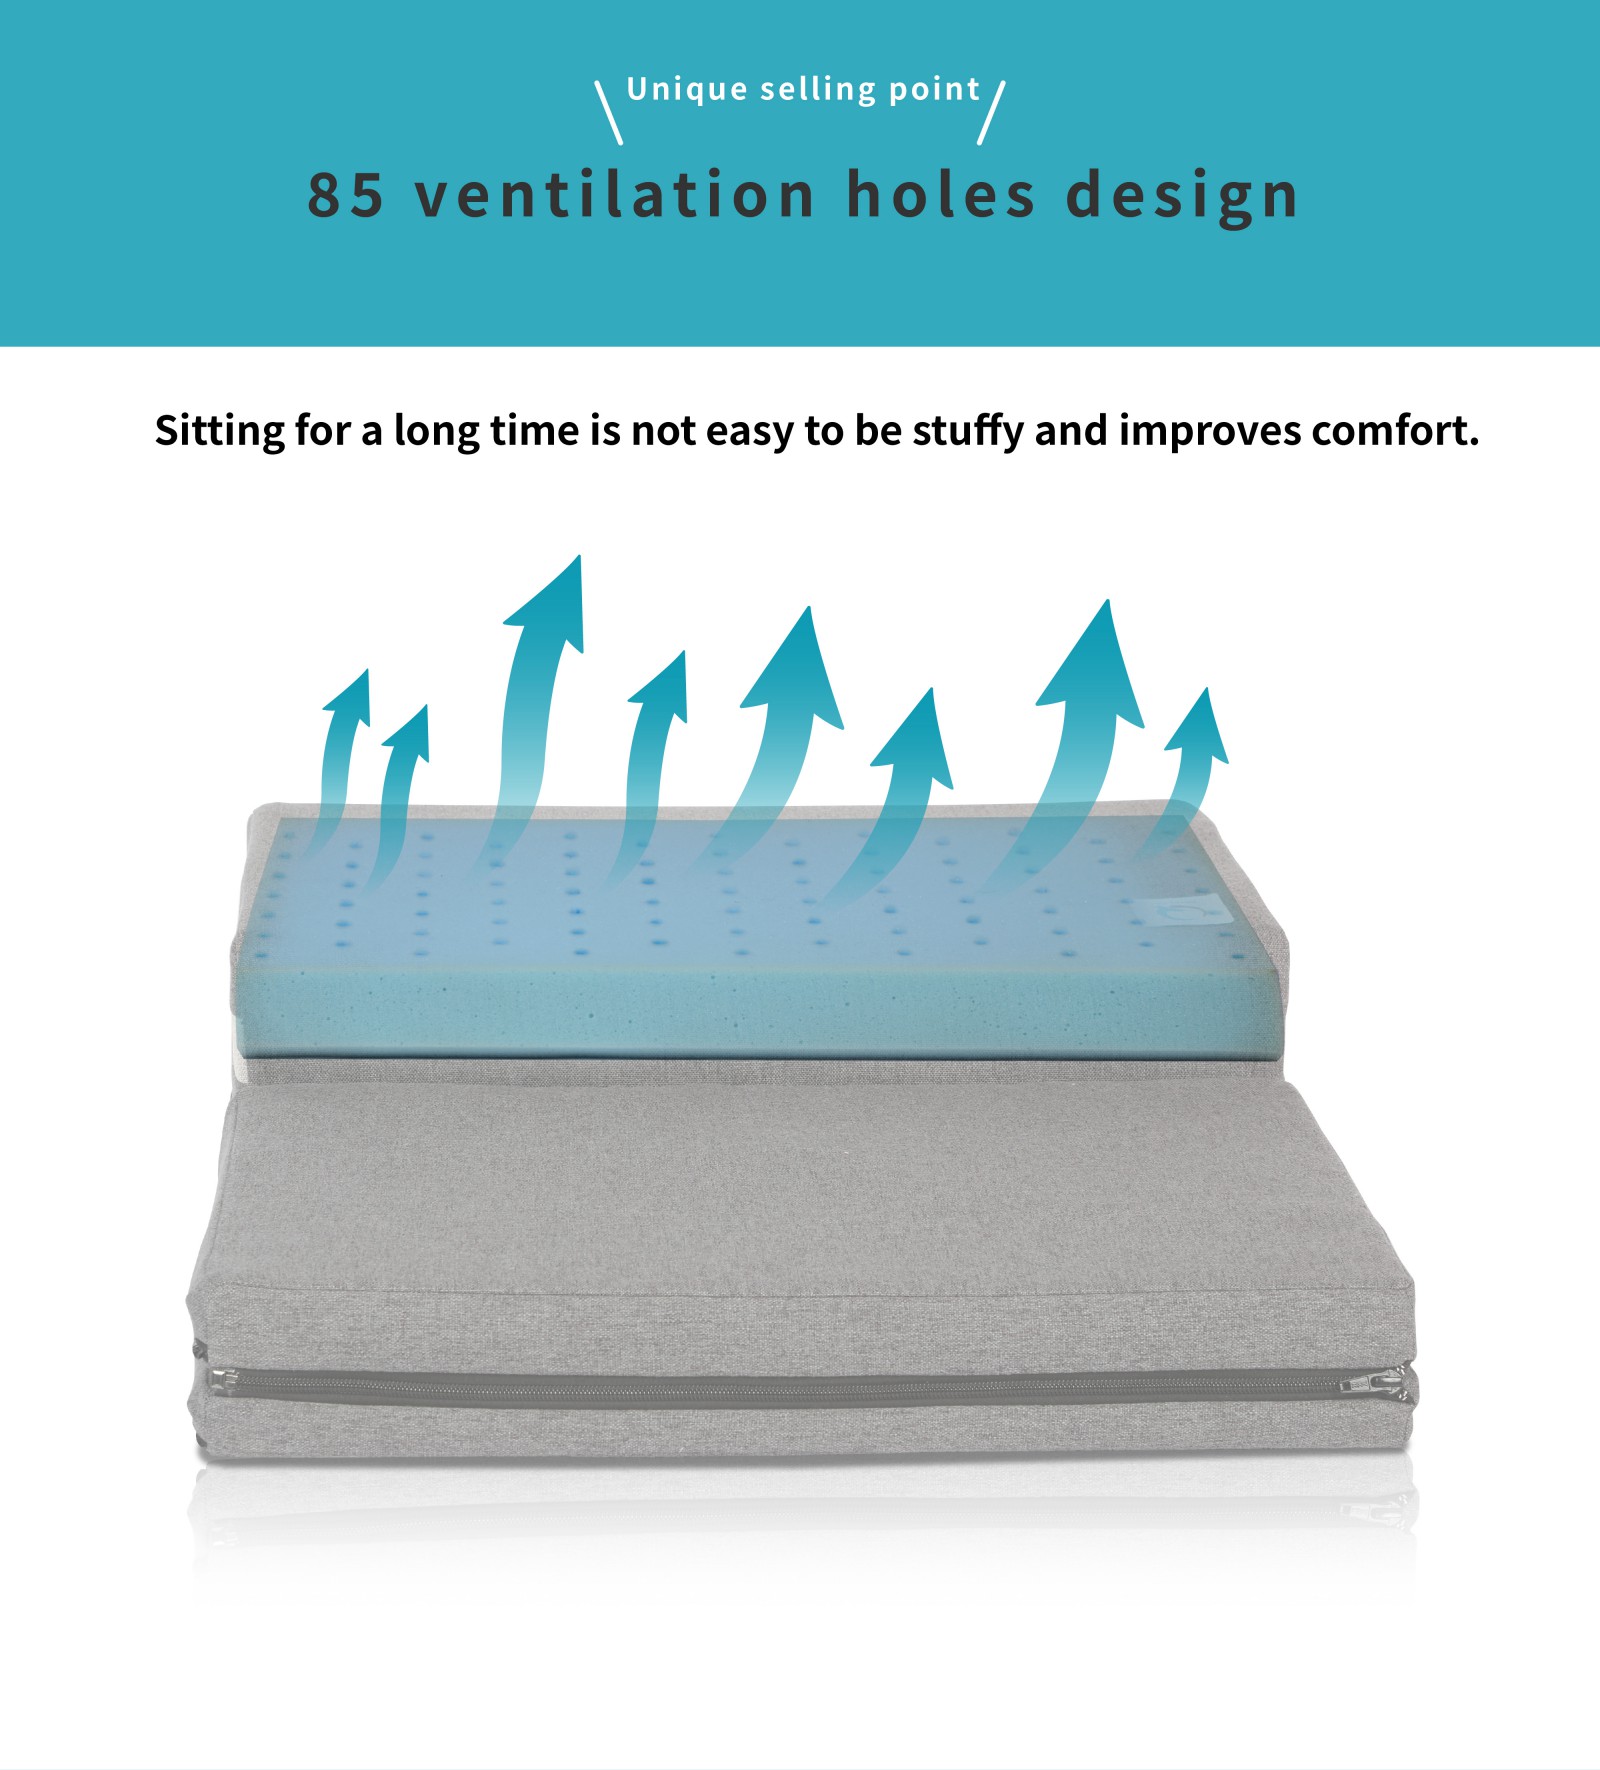 meditation chair with 85 ventilation holes design